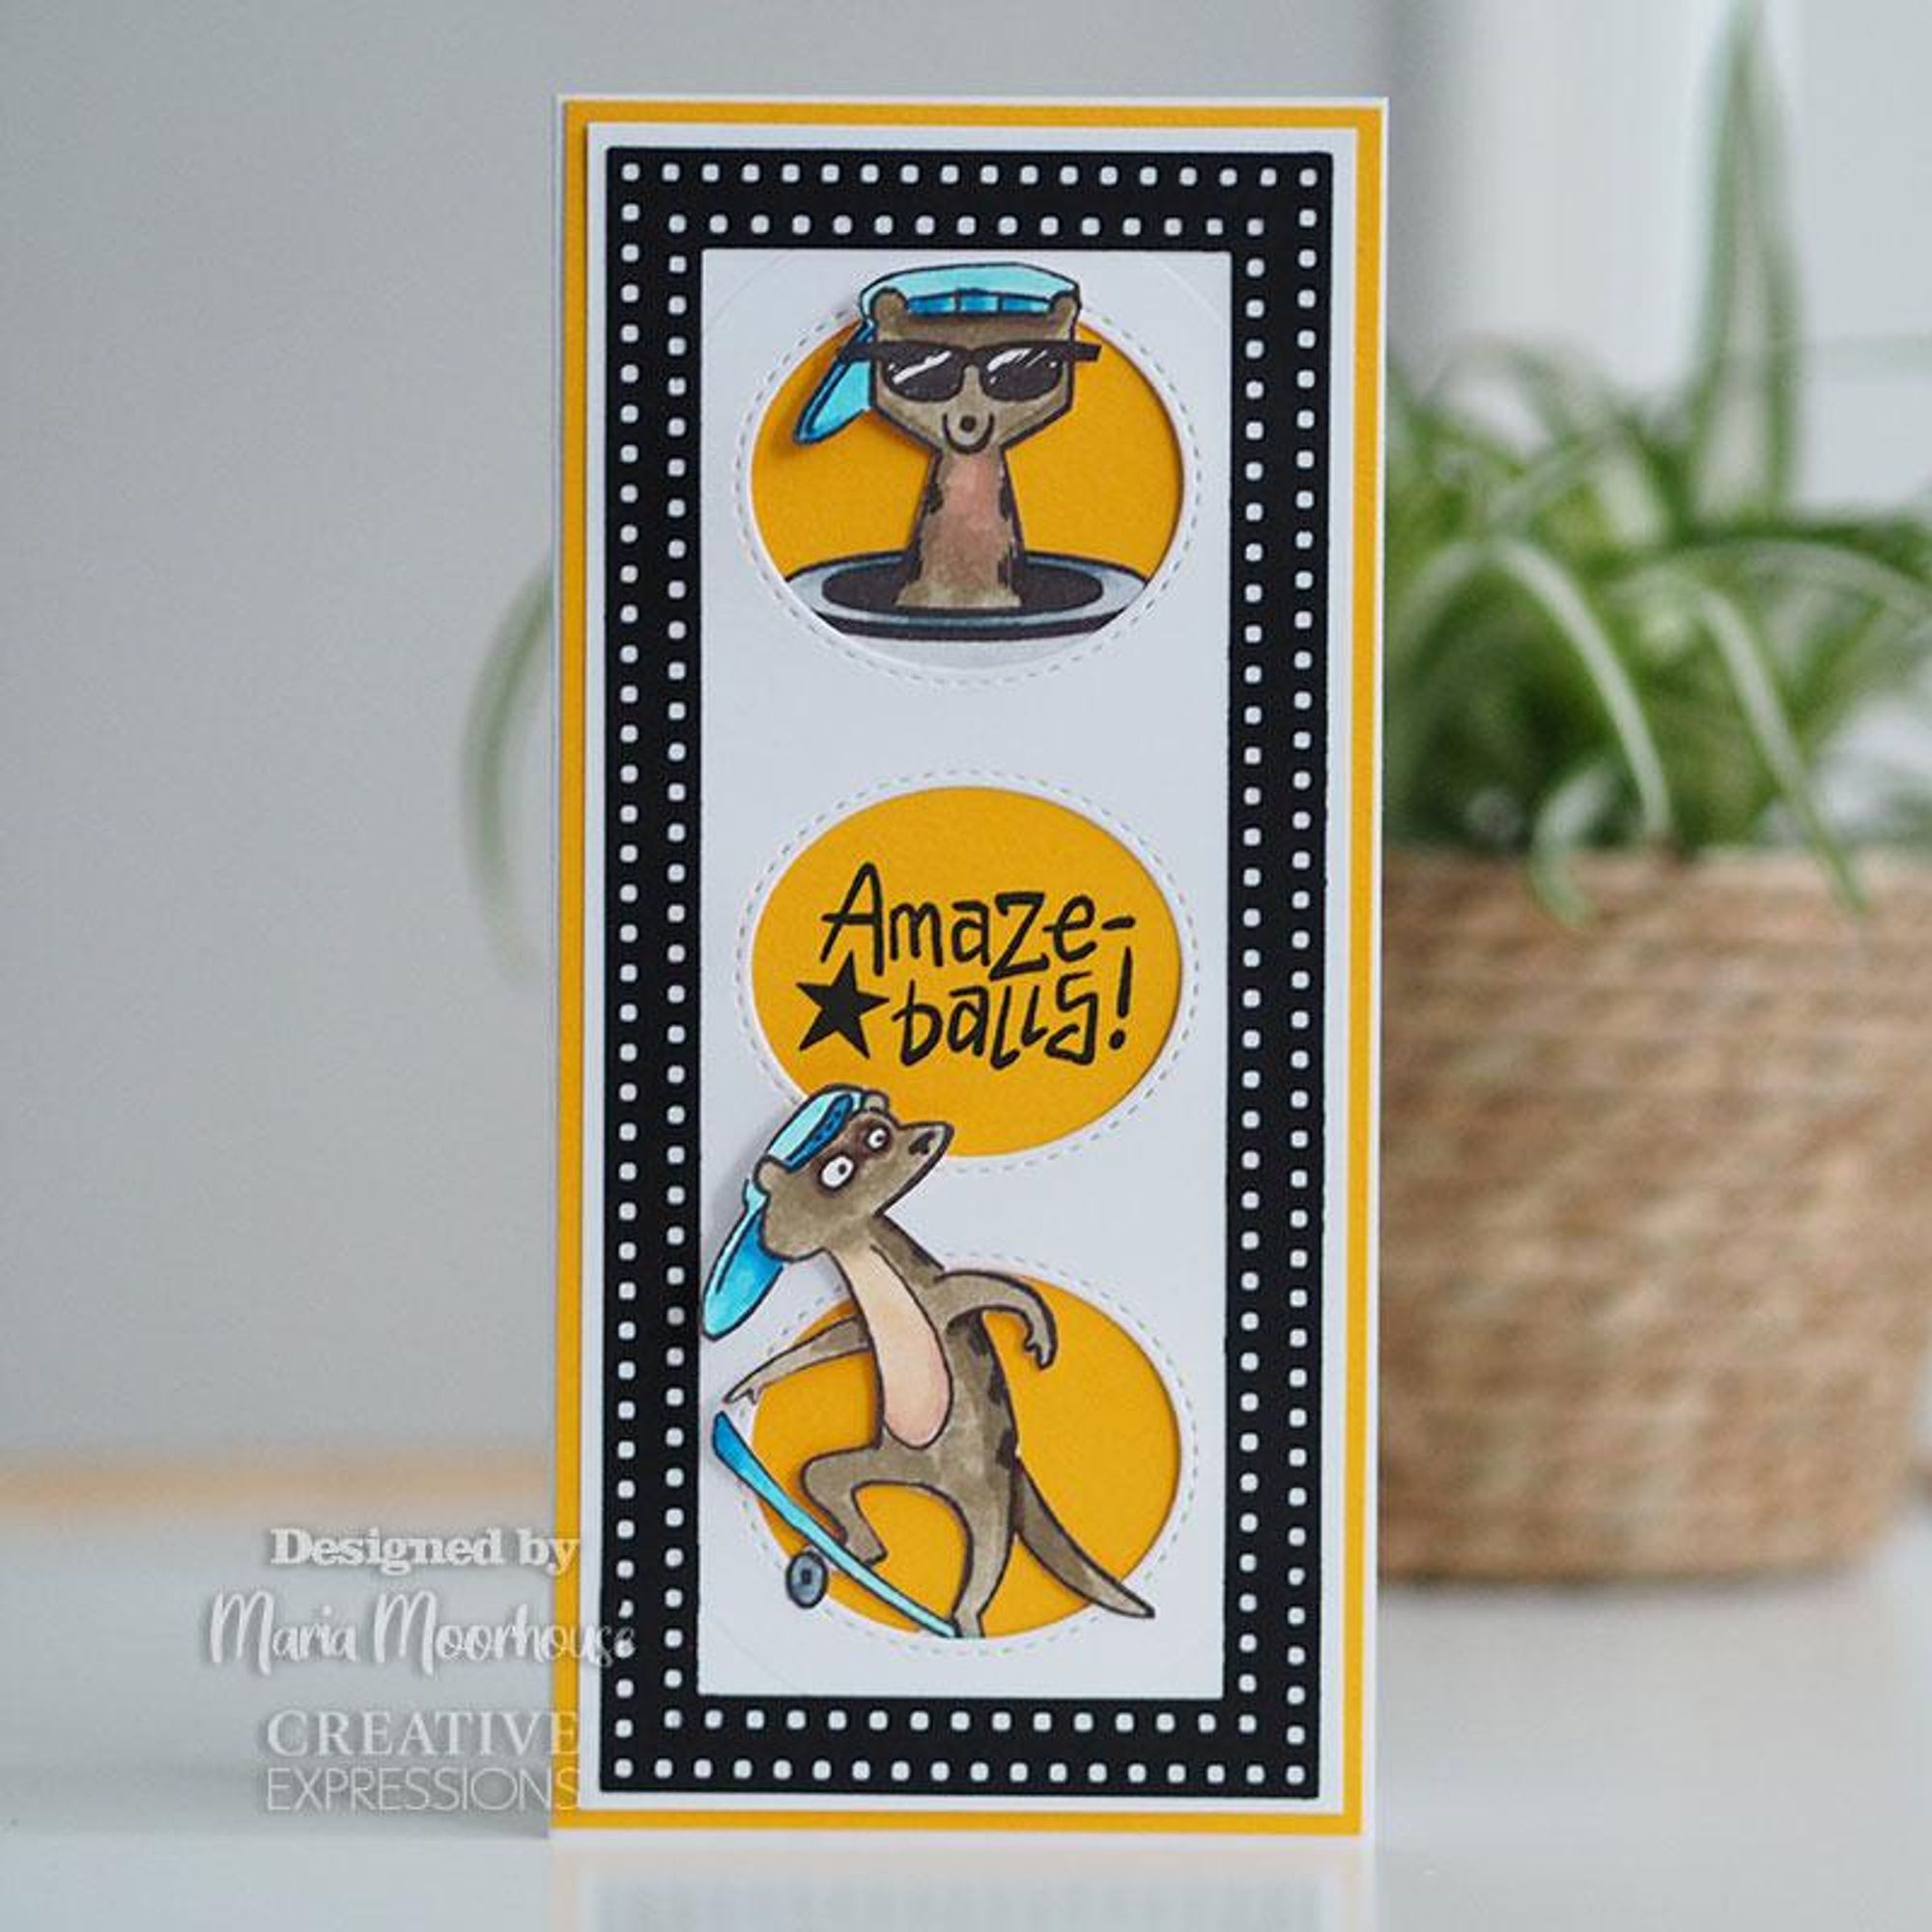 Creative Expressions Designer Boutique Collection Skate-Kats A5 Clear Stamp